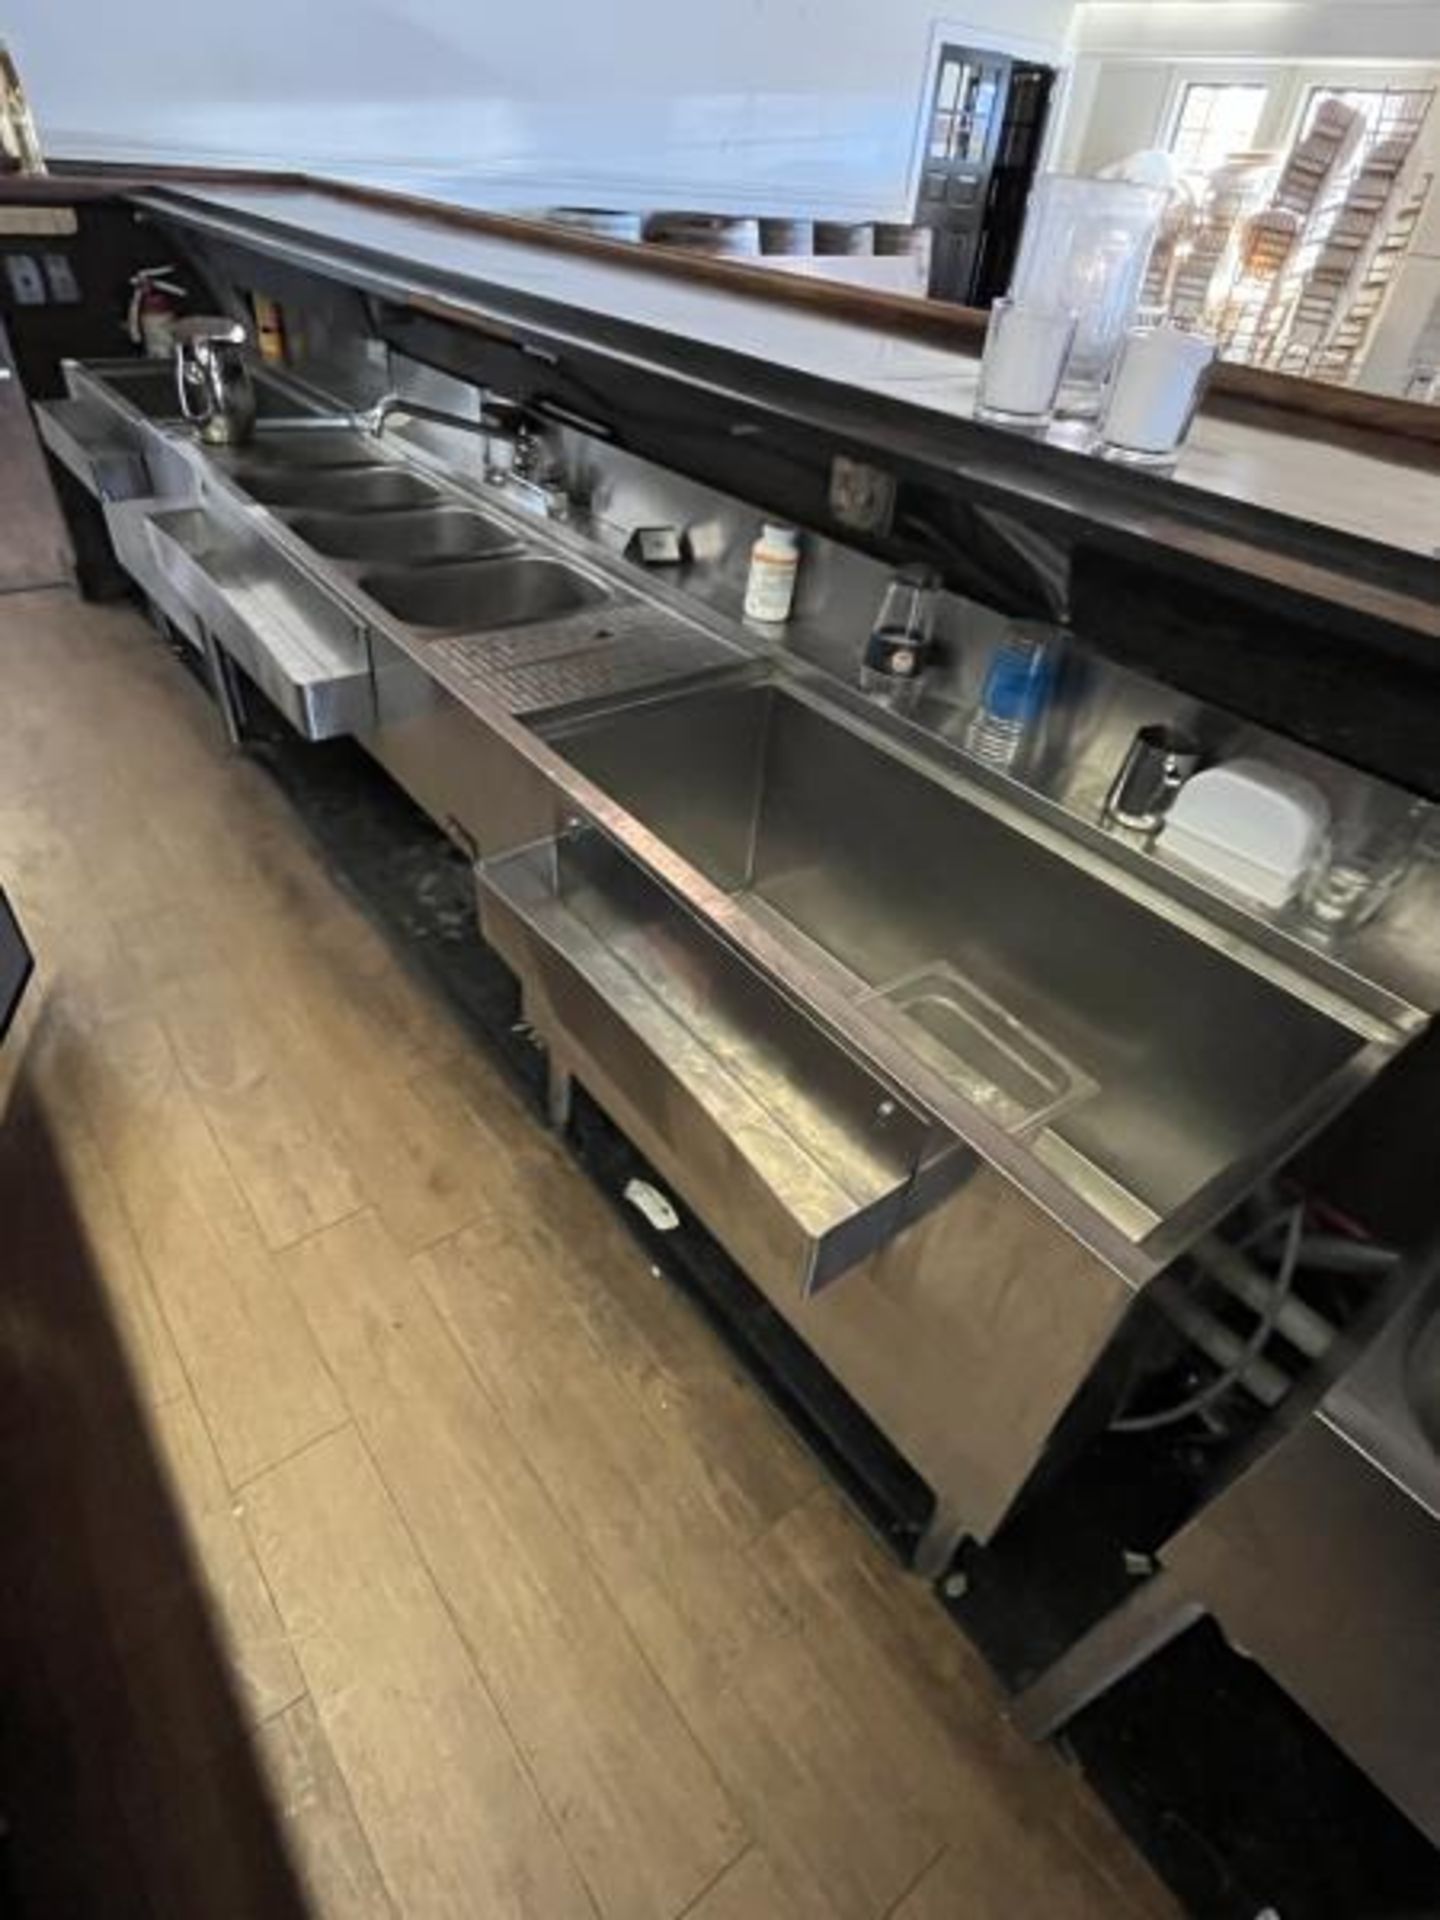 Krowne Back Bar 3-Bay Sink with Attached Ice Bin 95" Long x 23" Deep in Banquet room - Image 5 of 5